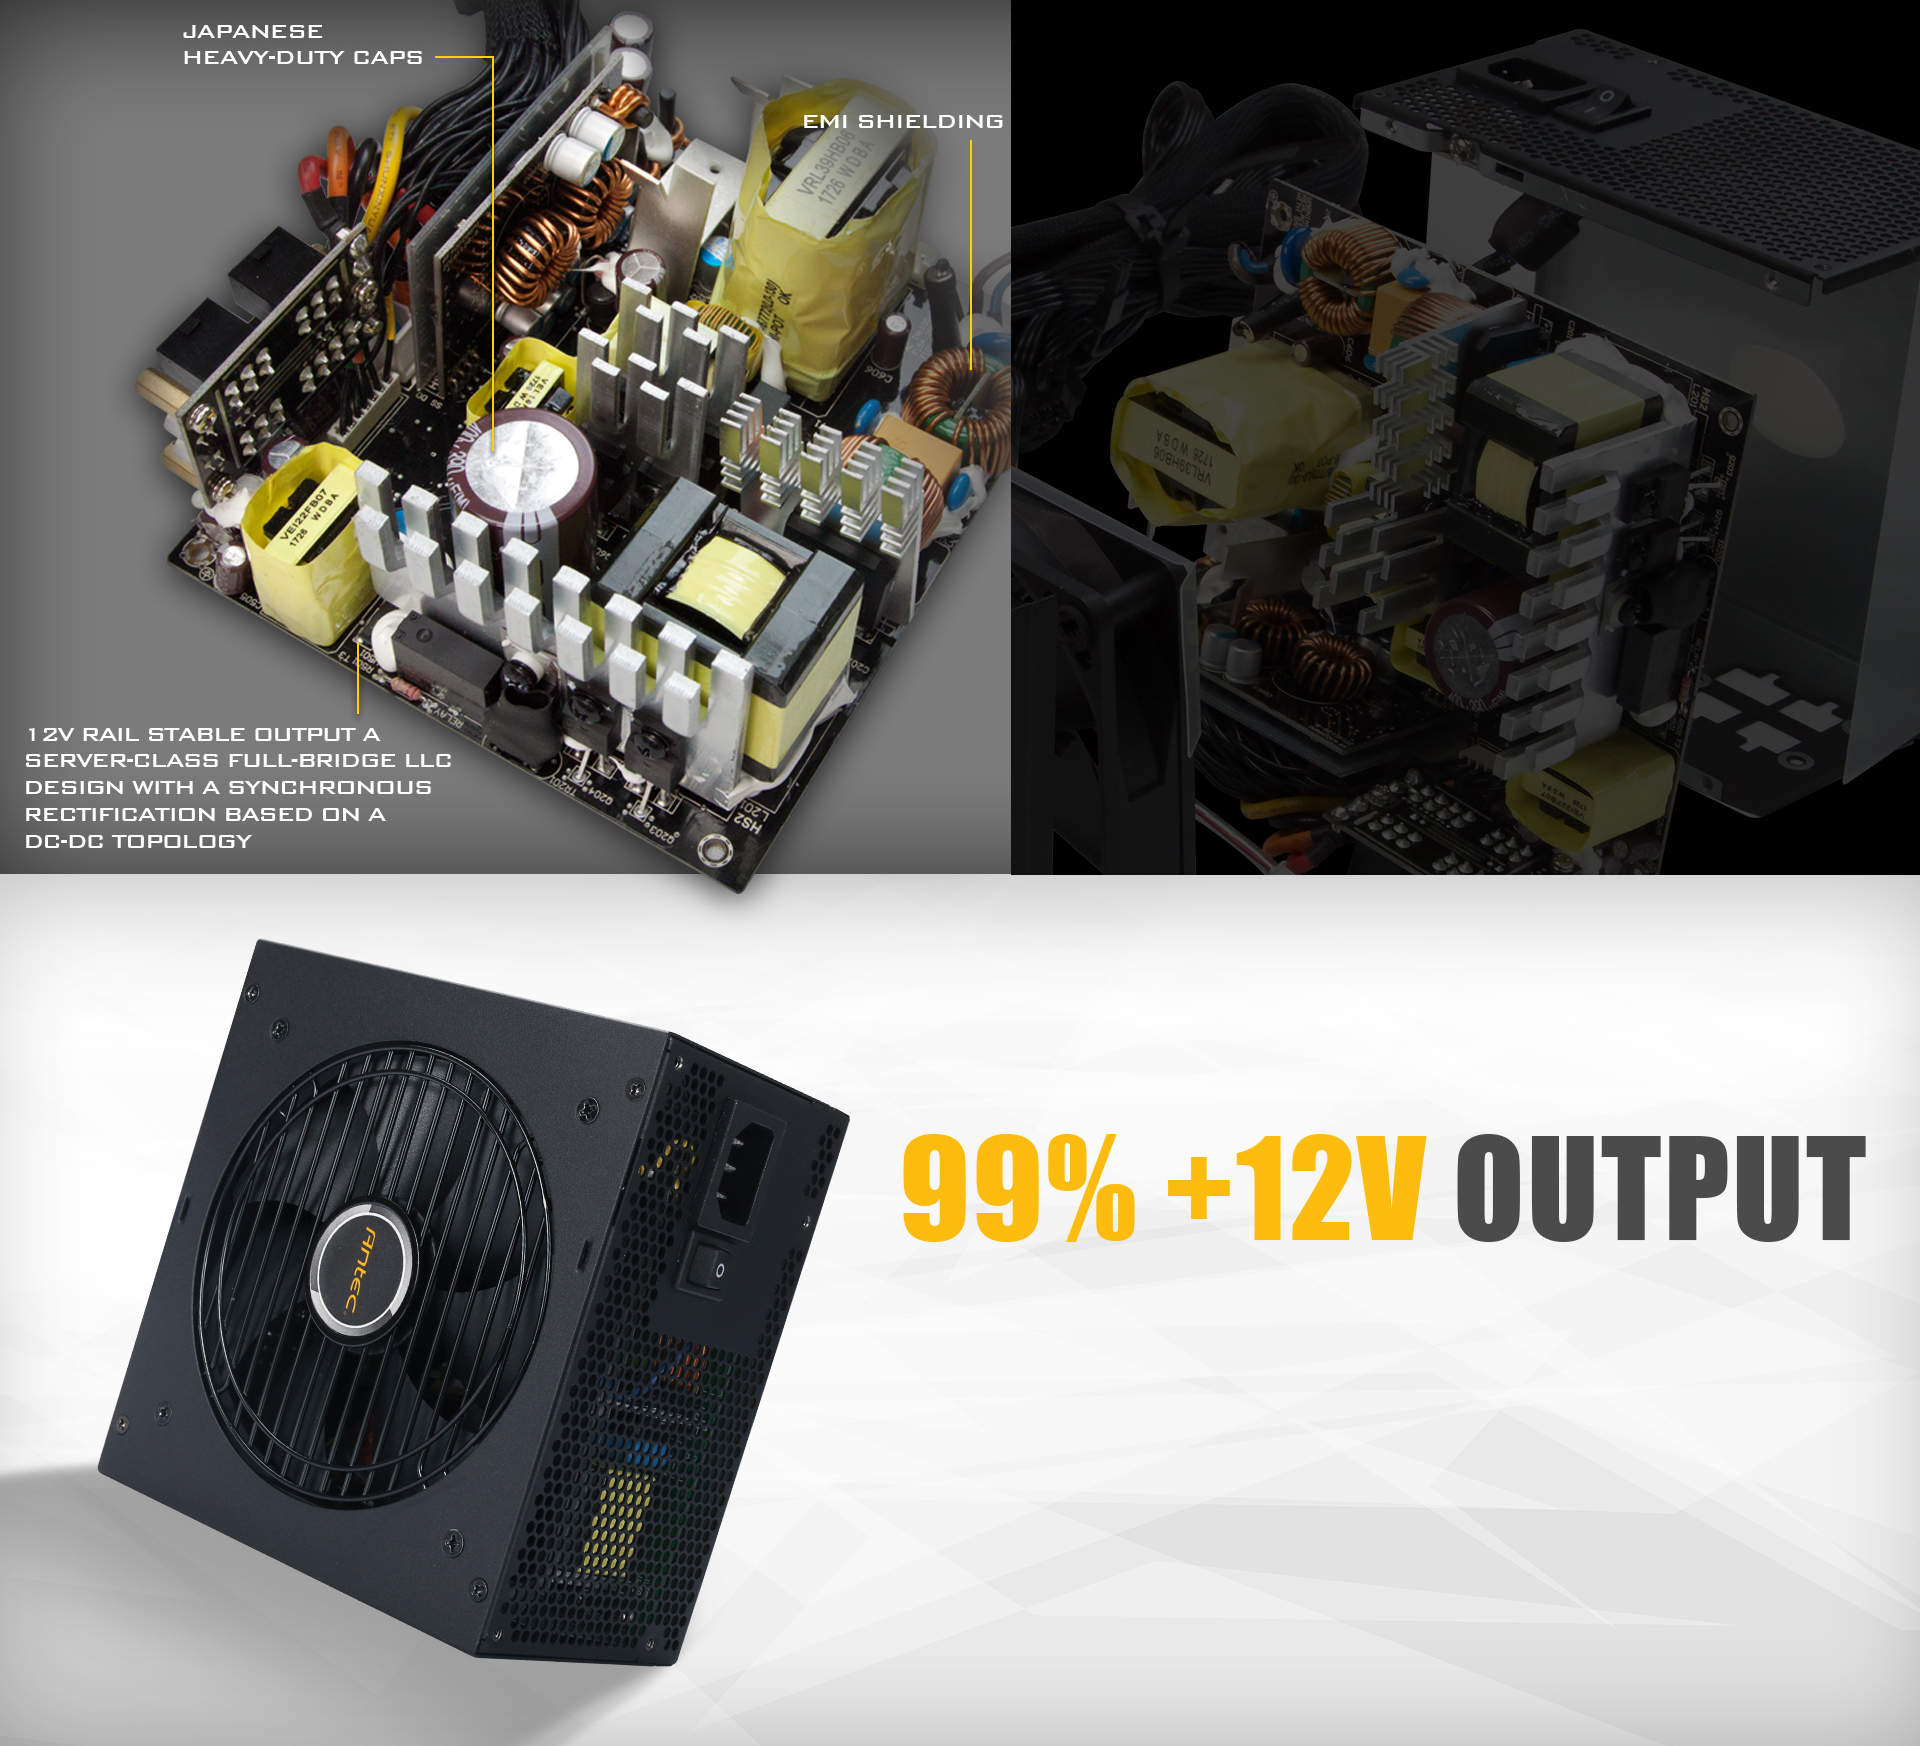 The Interior Components of the Antec NeoECO 750 GOLD PSU, along with text that reads and points out: Japanese heavy-duty caps, EMI shielding and 12V rail stable output A server-class full-bridge LLC design with a snchronous rectification based on a dc-dc topology. Below these images is a banner showing the Antec NeoECO Power Supply Angled Up to the Left, Next to Text That Reads: 99% +12V OUTPUT